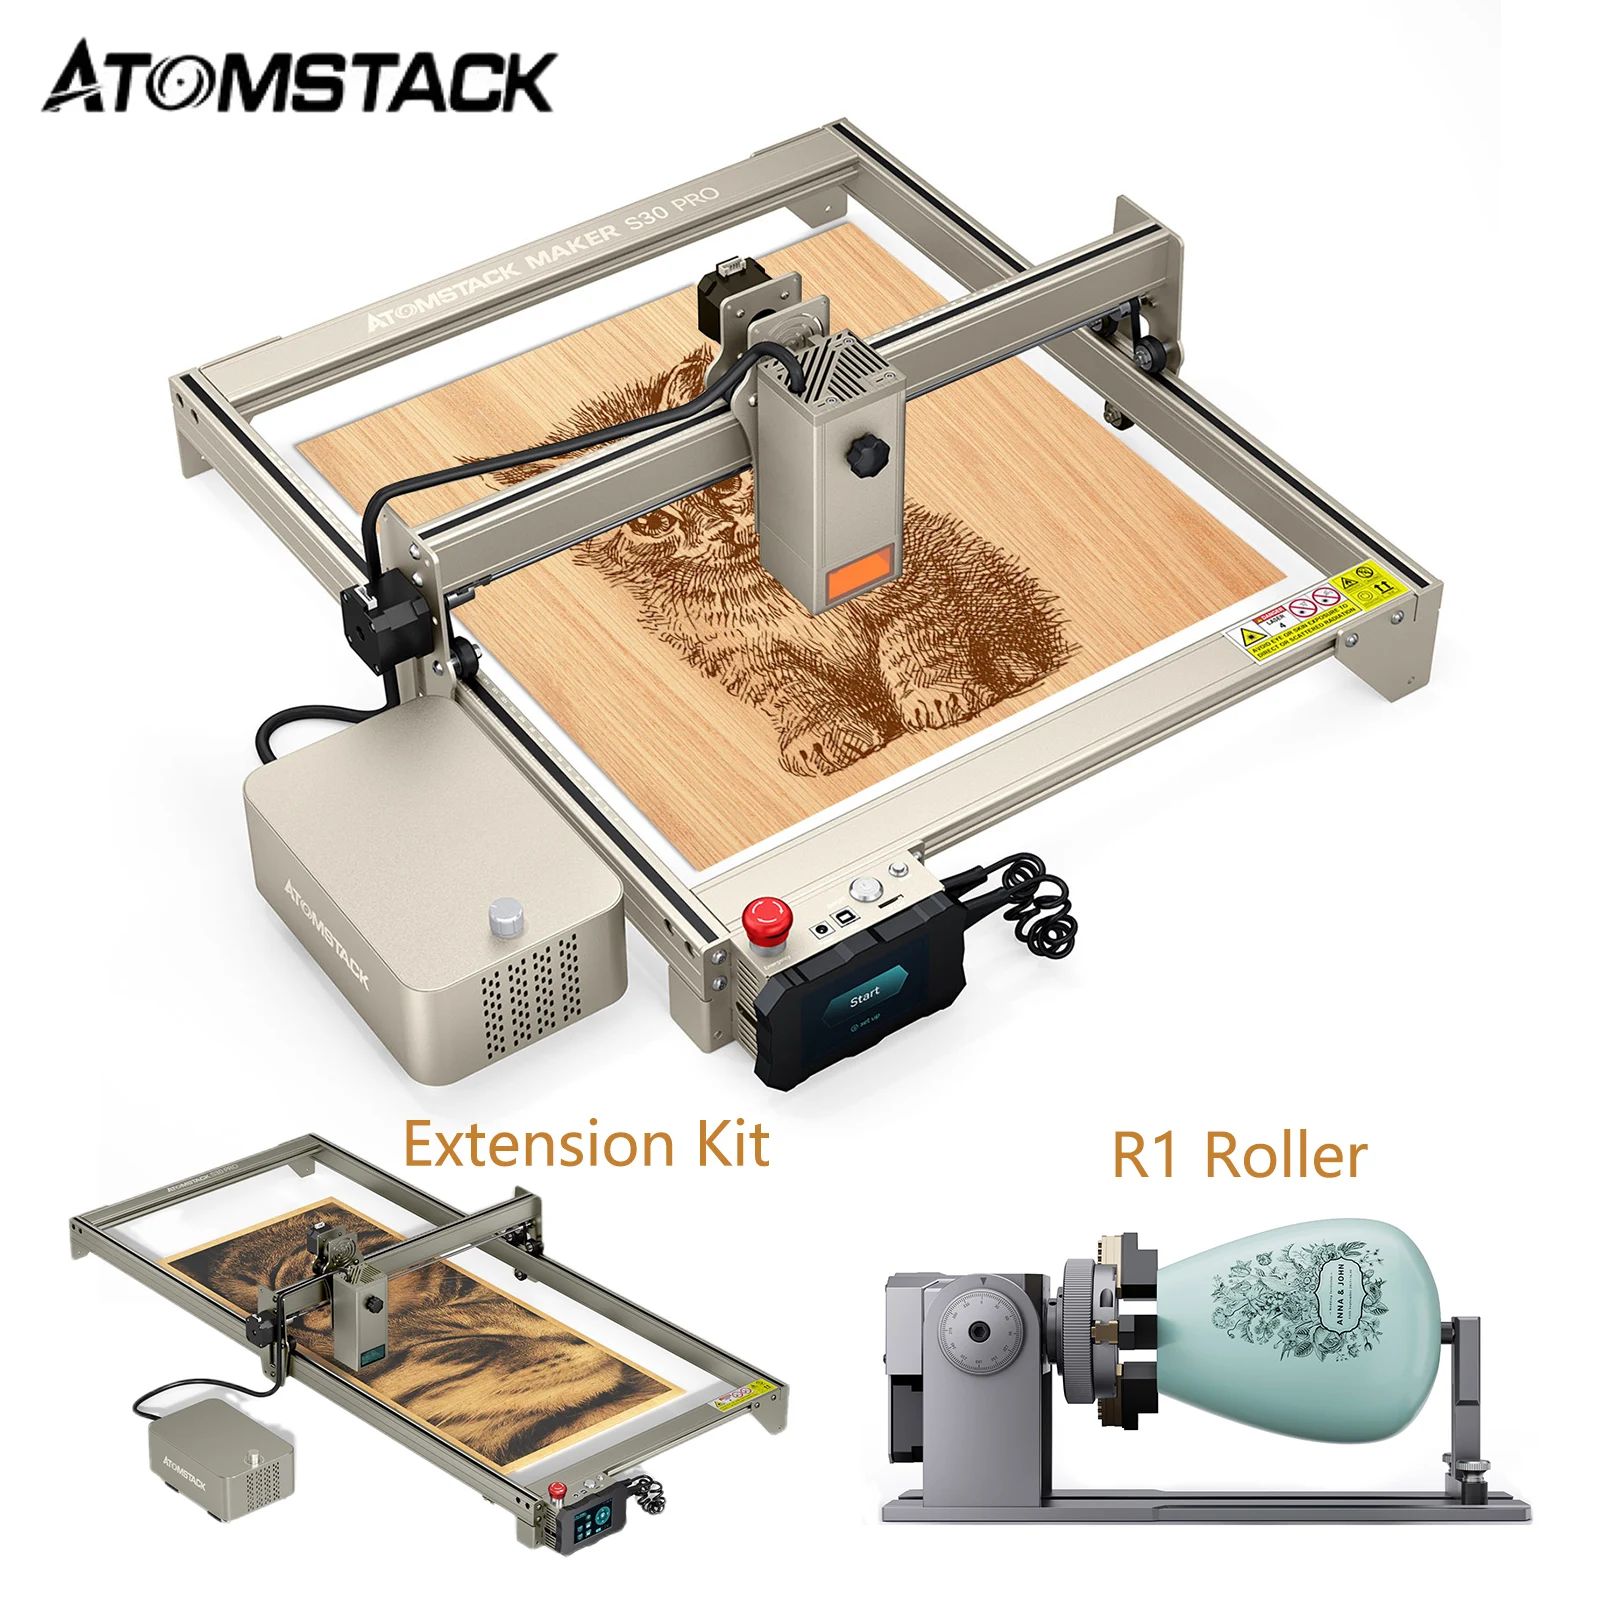 ATOMSTACK X30/S30 Pro Laser Engraver Cutting Machine 33W Output CNC Metal Engraving Dual Air Assist Support APP Control